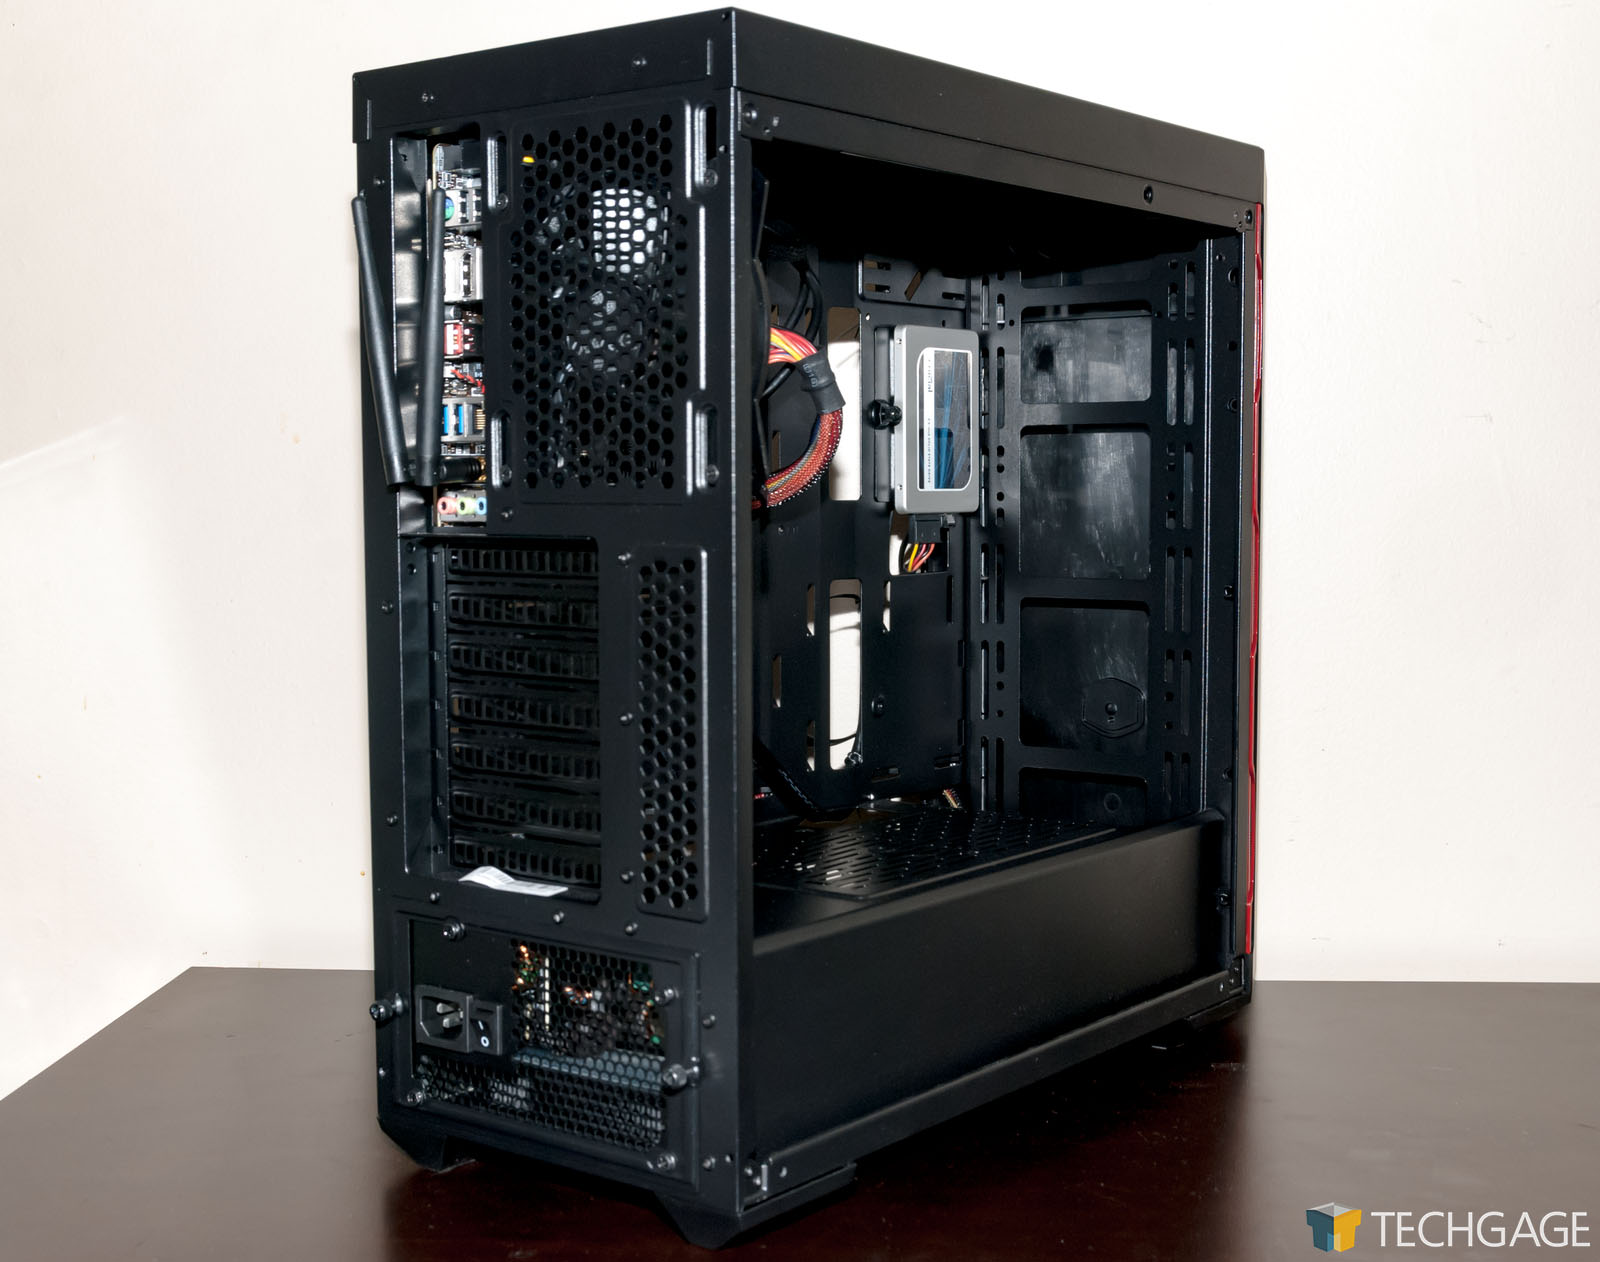 A Quick Look At Cooler Master's $50 MasterBox MB600L Mid-tower